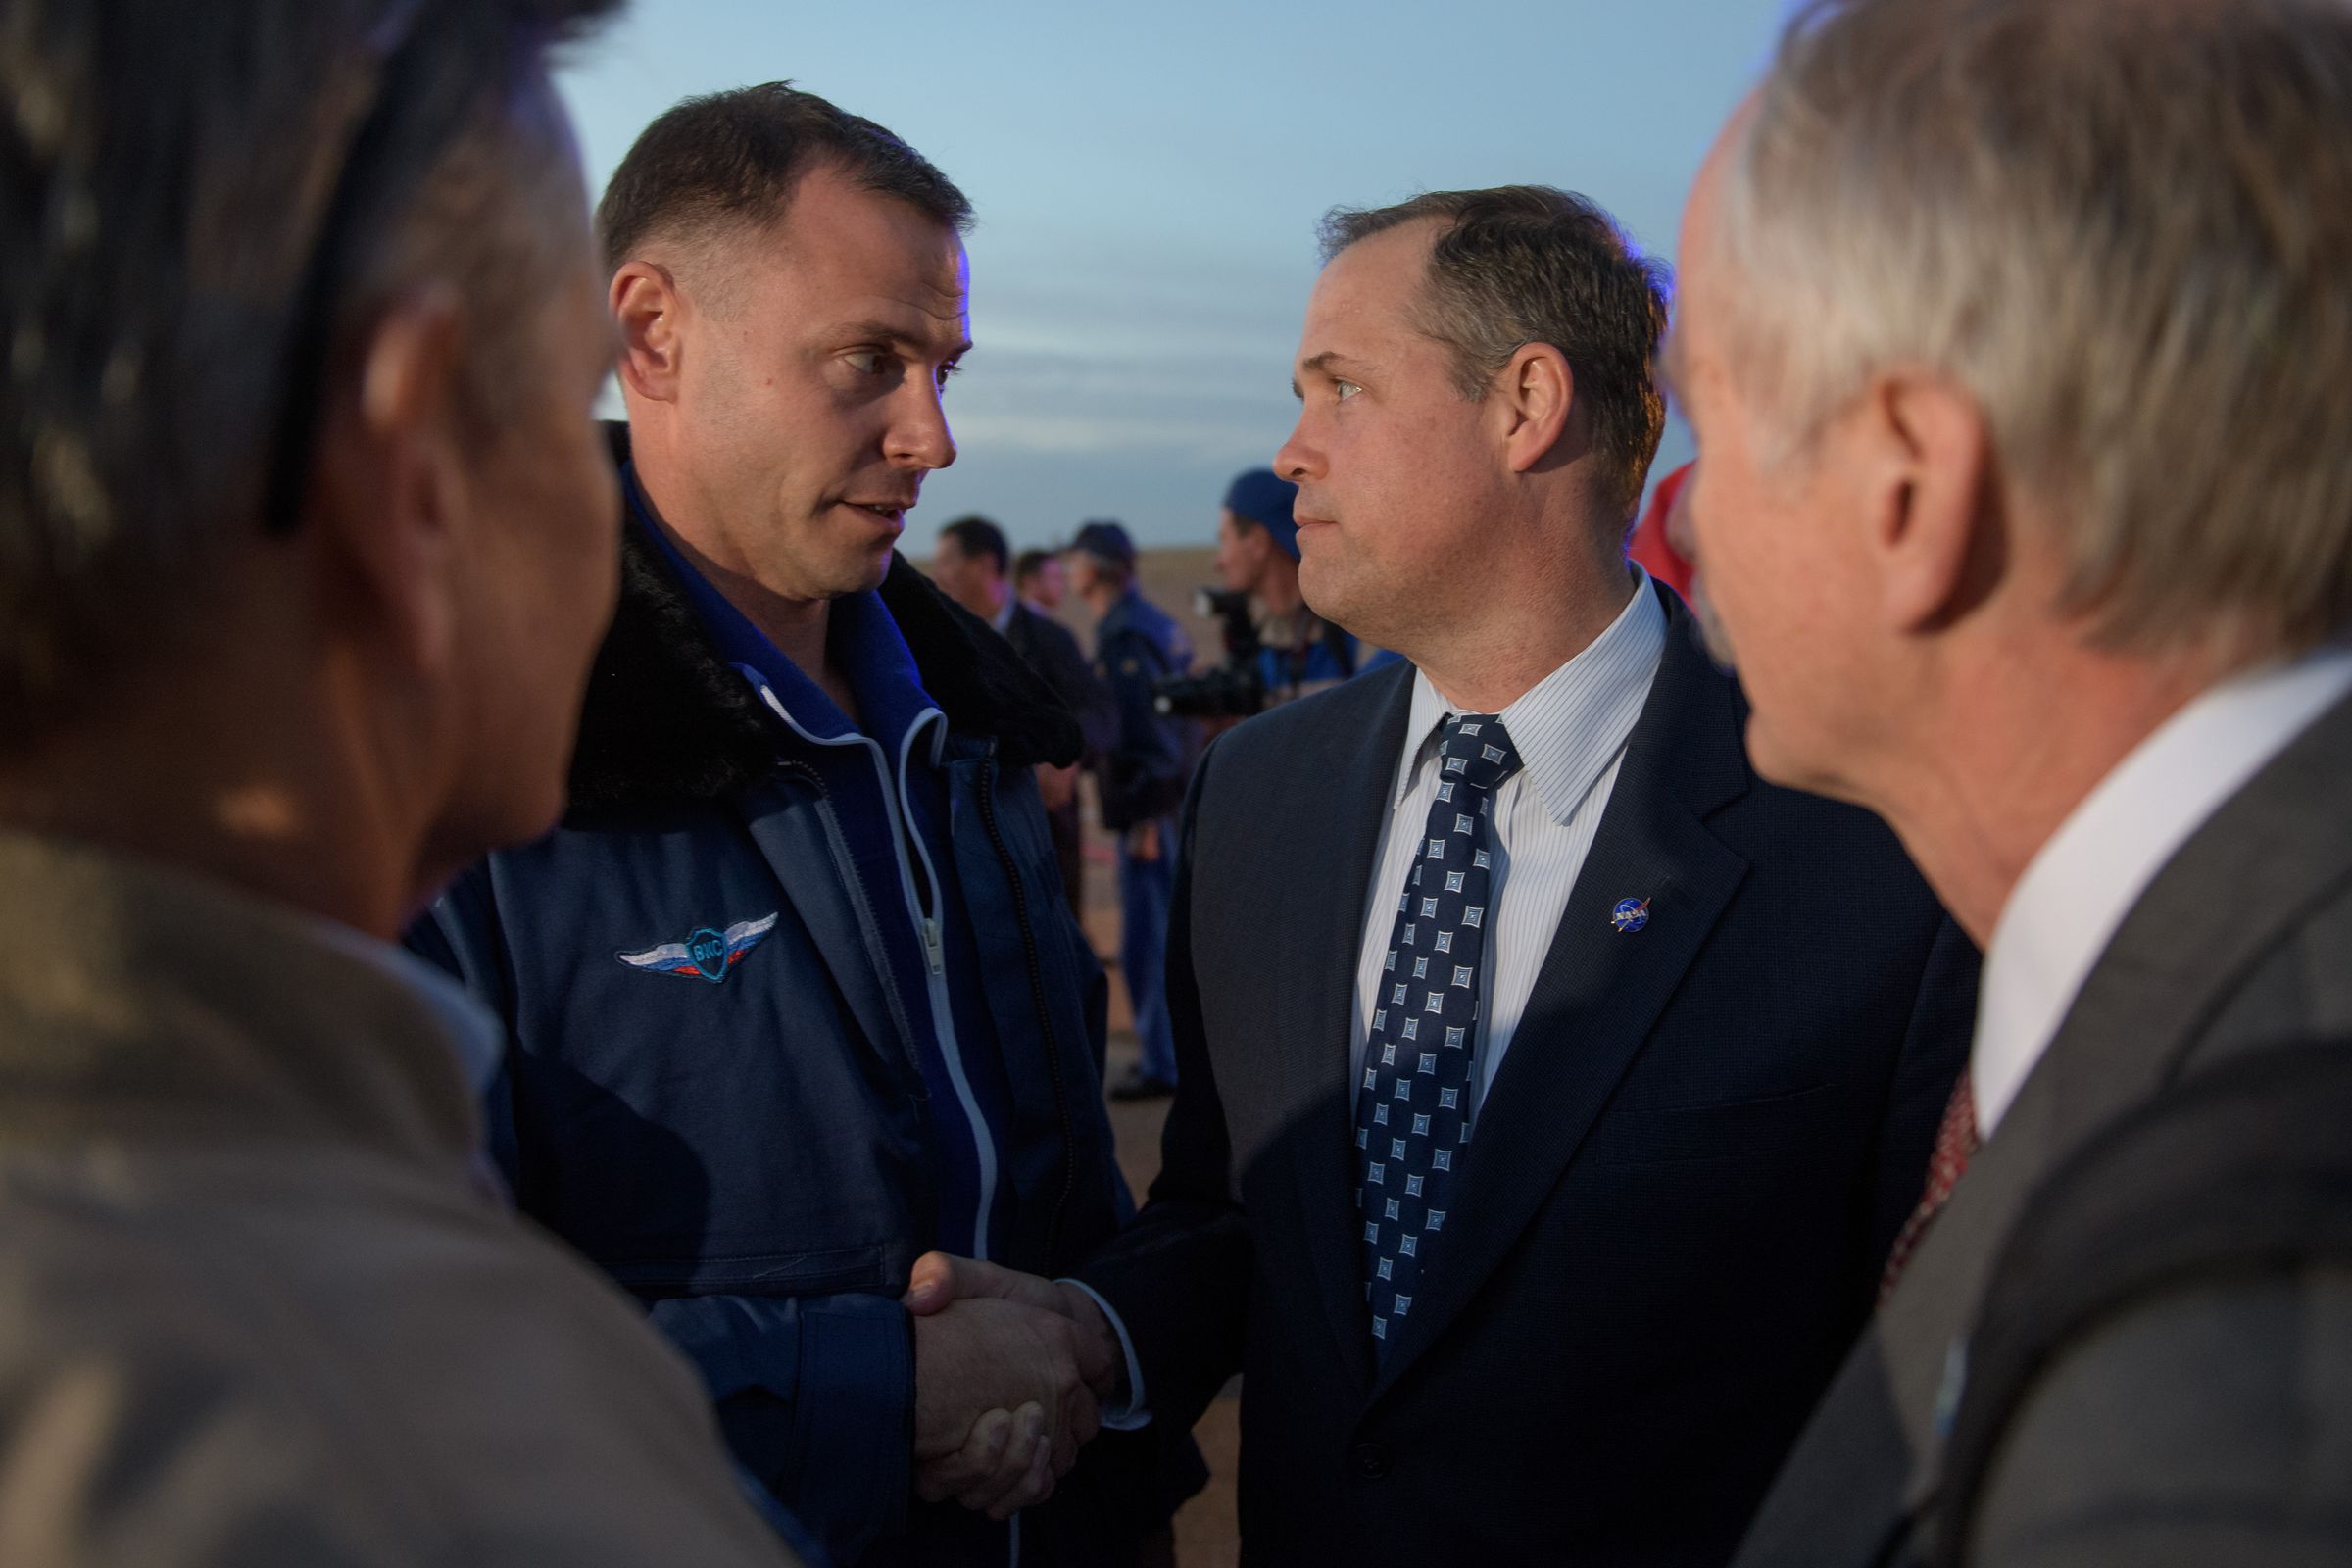 NASA astronaut Nick Hague (L) shakes hands with NASA administrator Jim Bridenstine after landing back on Earth